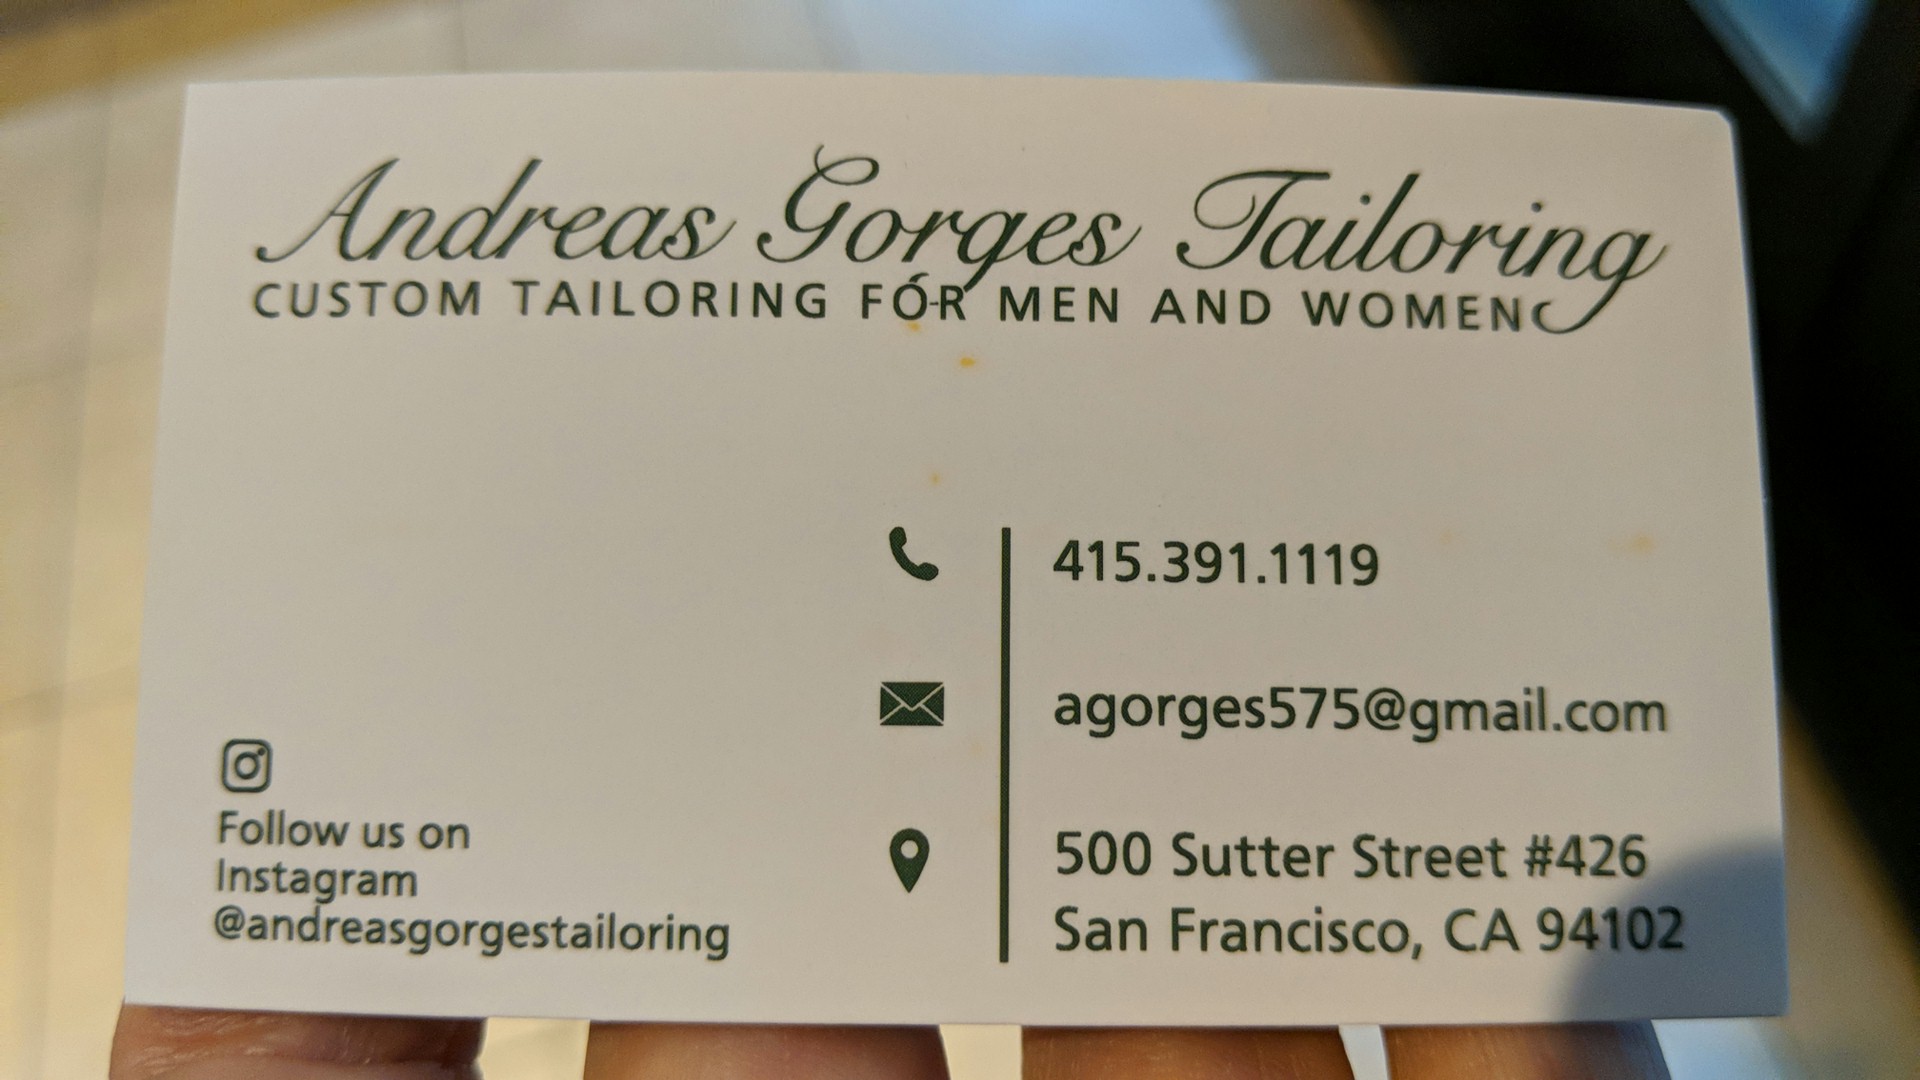 Andreas Gorges Tailoring